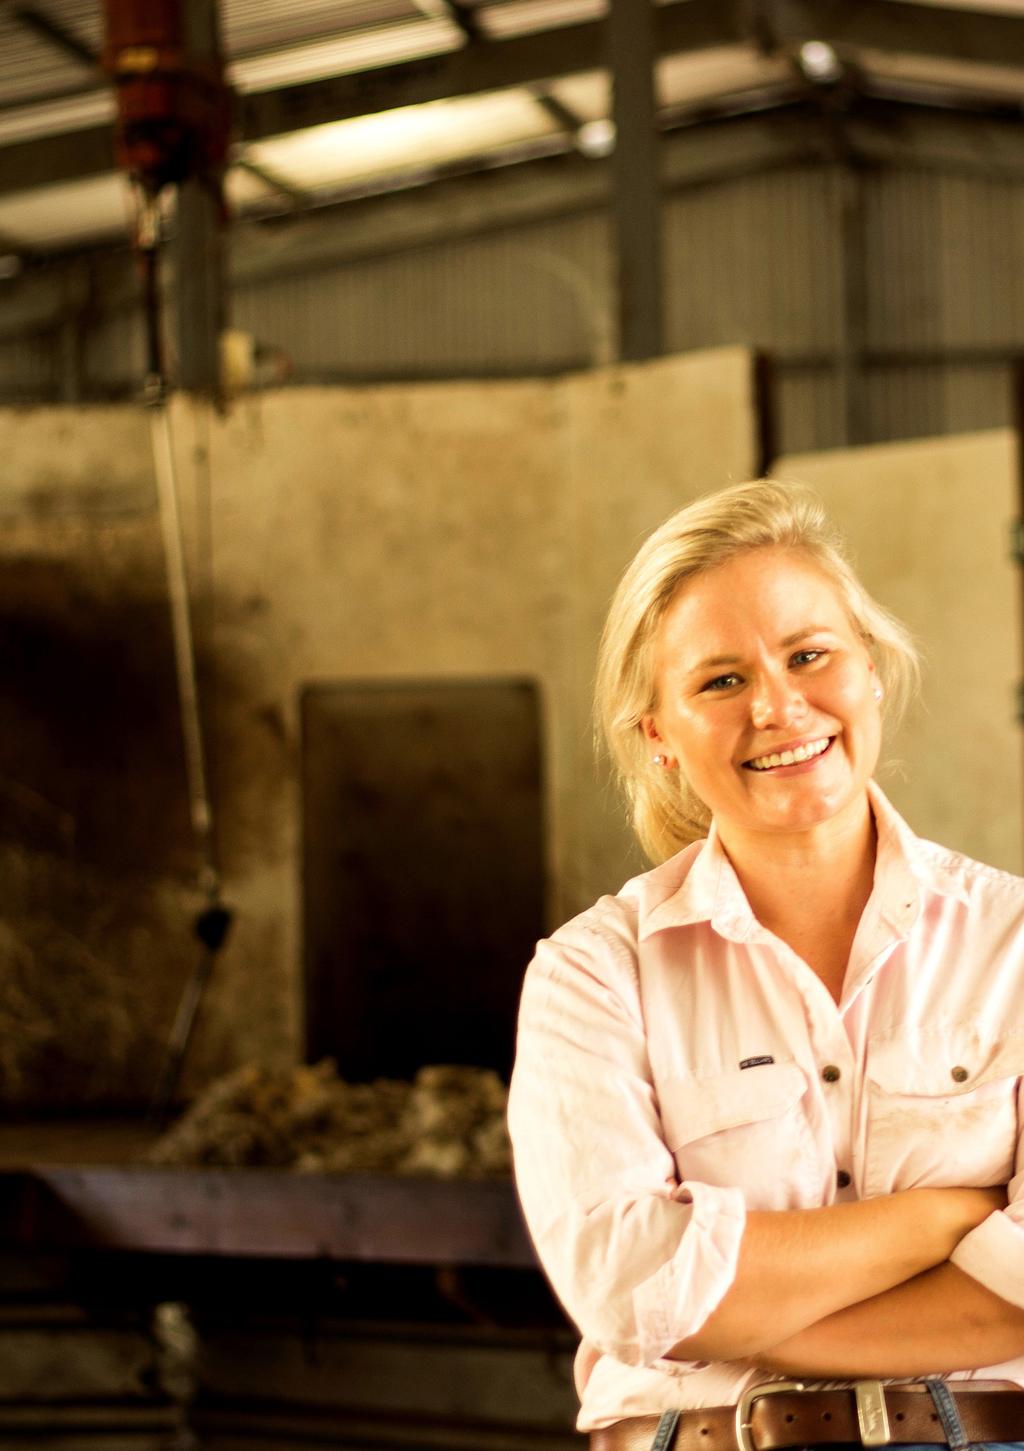 Growth in self-employed women Airlie Trescowthick is the founder of Farm Table, an online platform which connects modern farmers with the latest research and resources, and each other, to help them